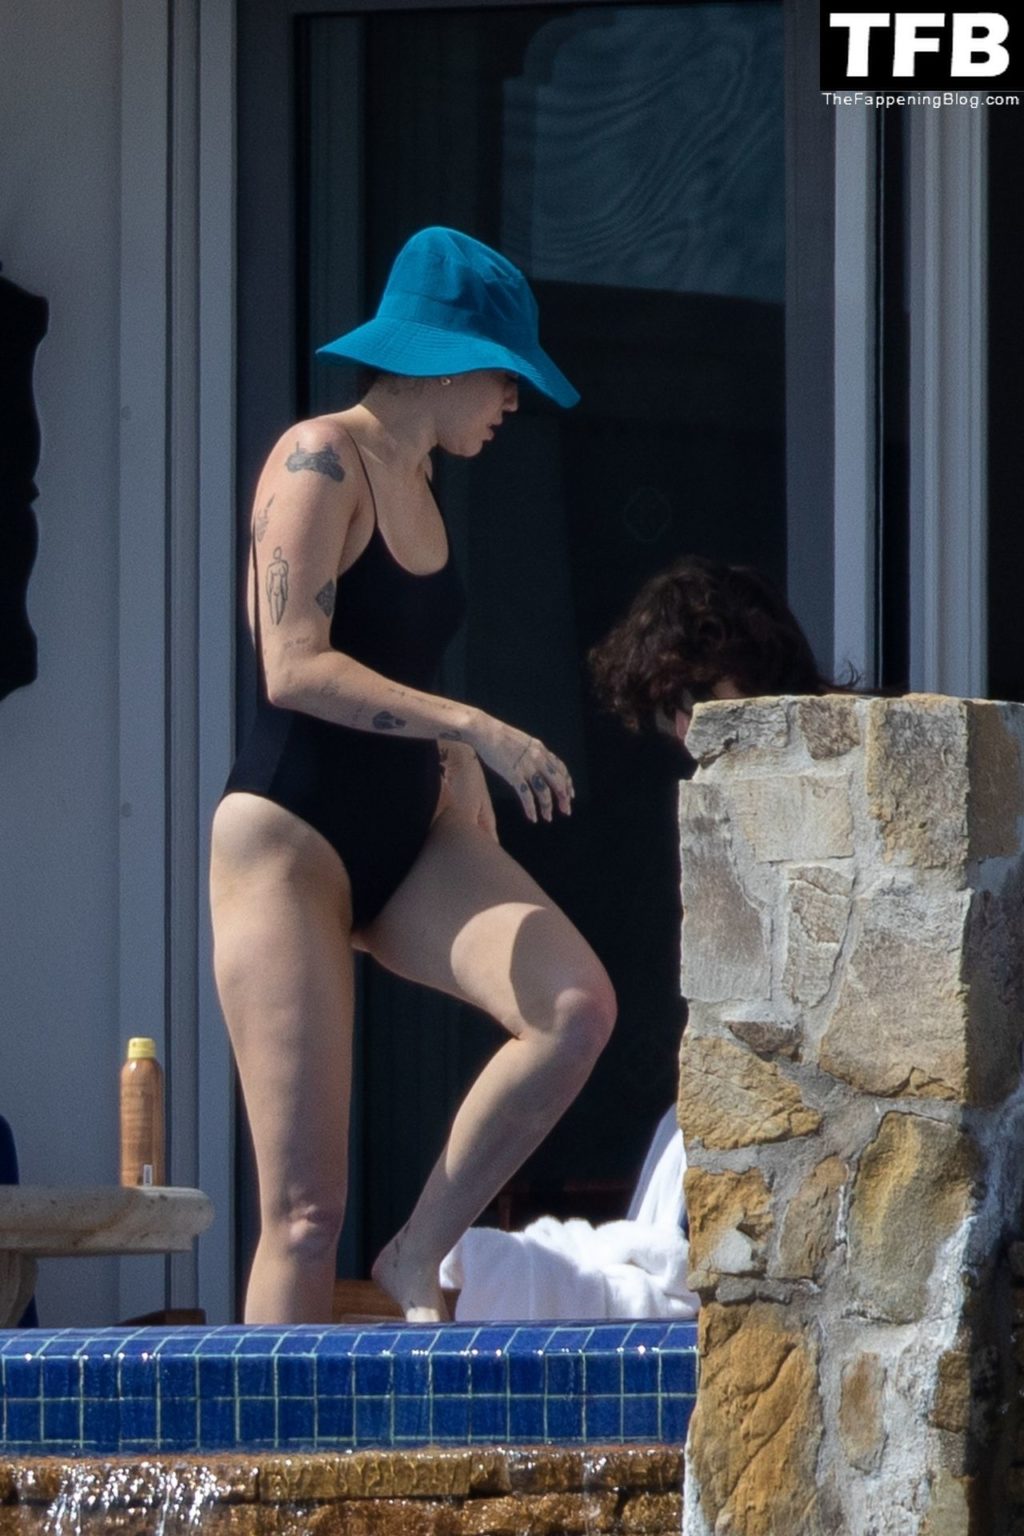 Miley Cyrus Sexy The Fappening Blog 19 1024x1536 - Miley Cyrus Brings Beach Body to Cabo San Lucas Alongside Her New Rumored Boyfriend (36 Photos)